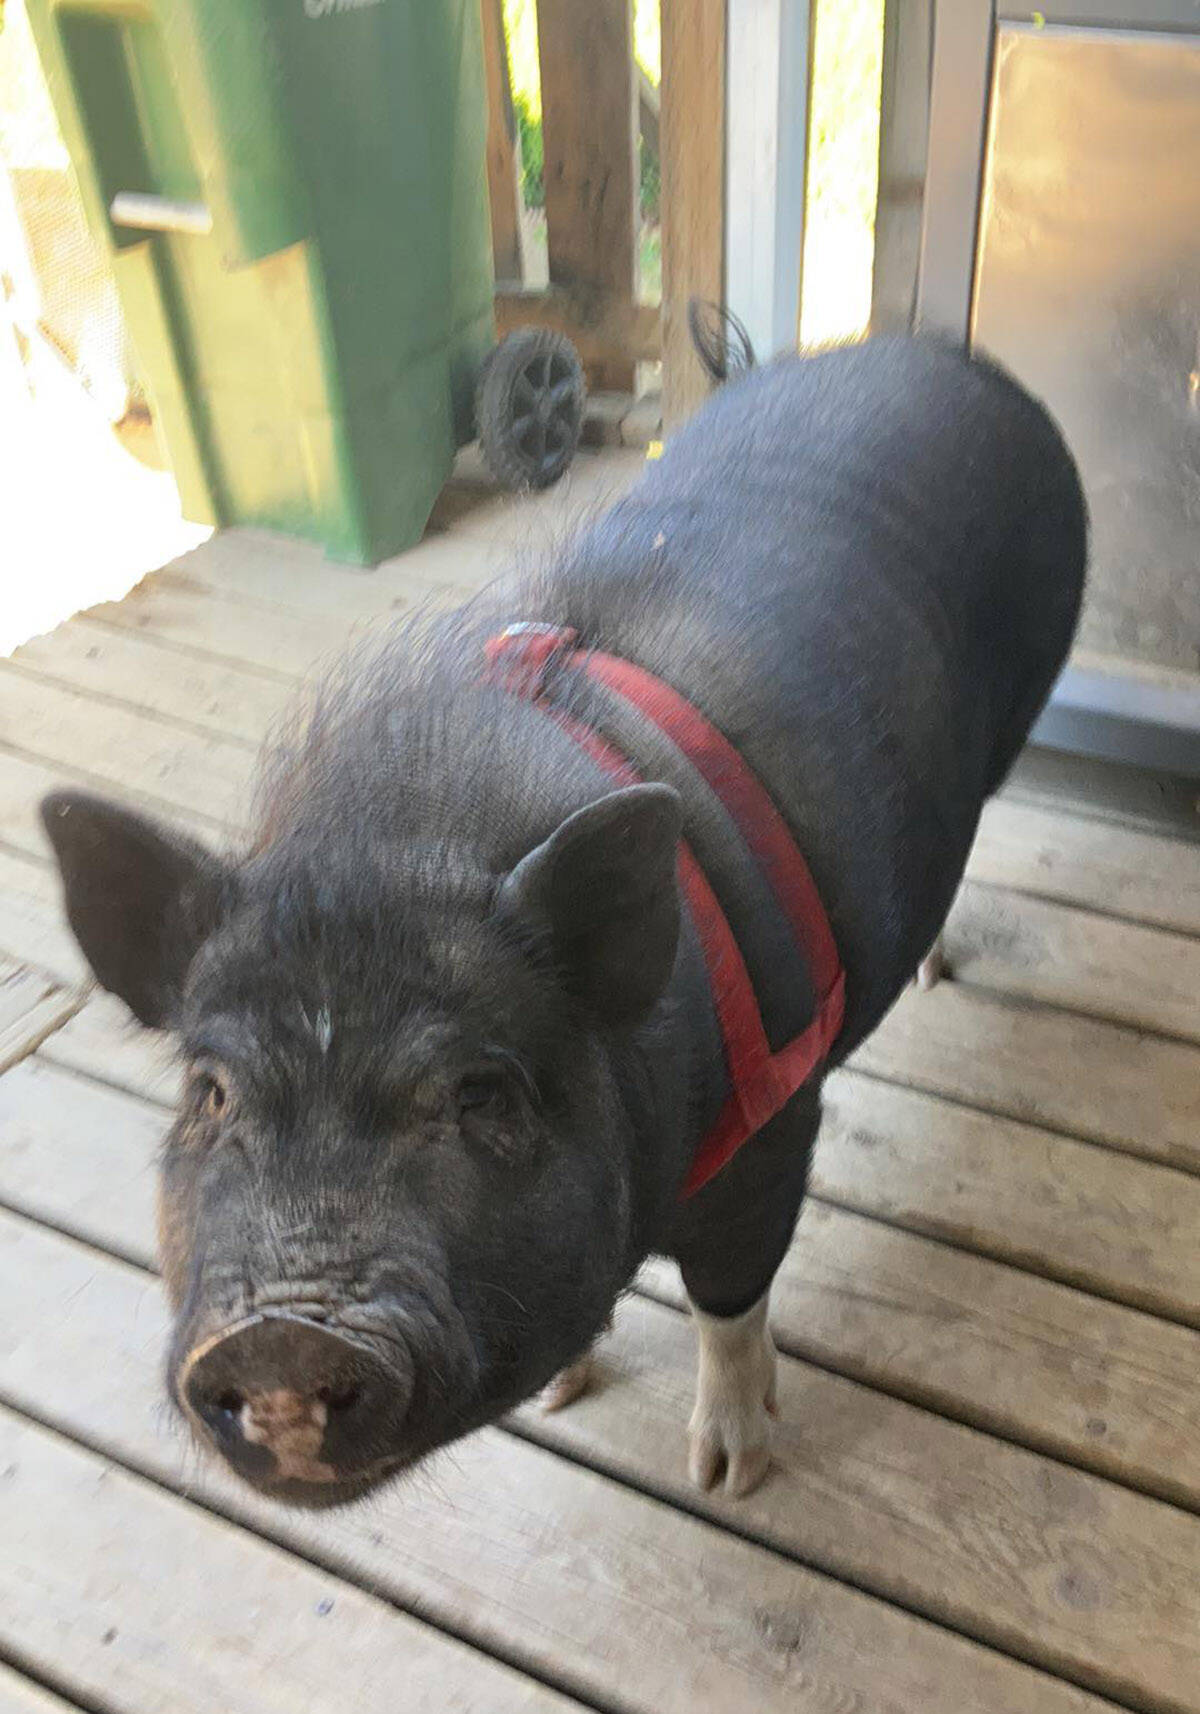 Hamson the pig. (Submitted)